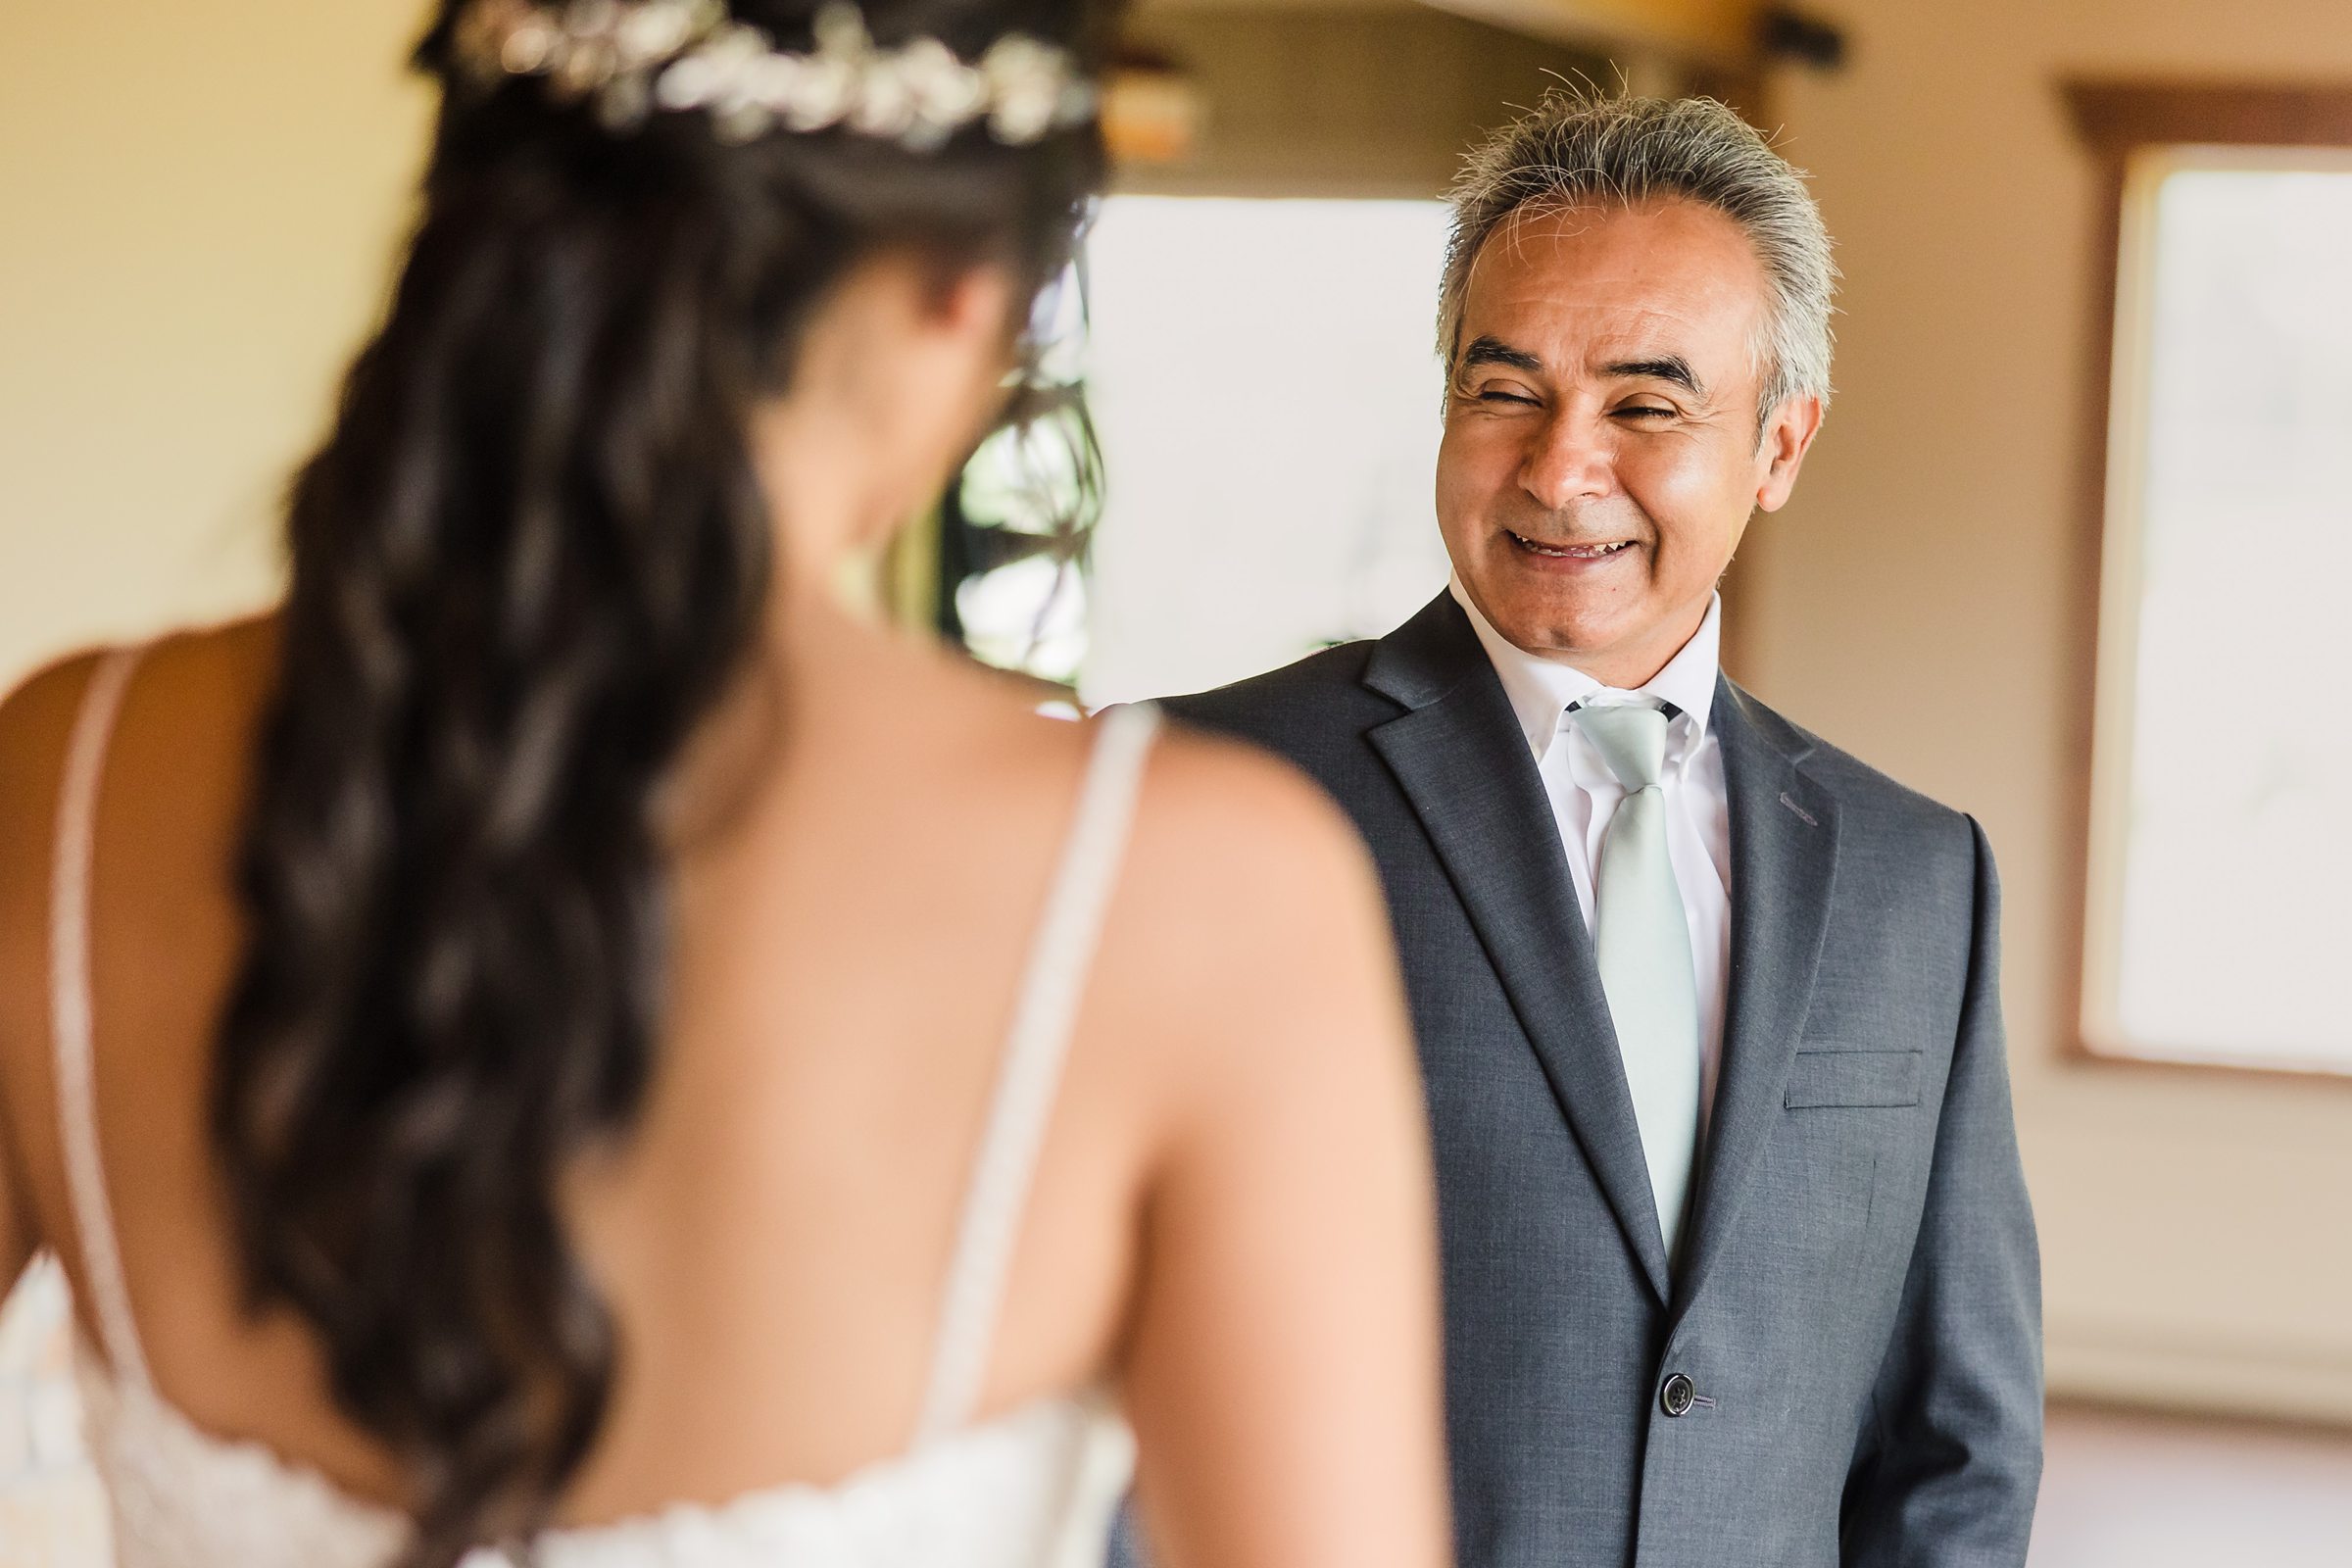 The bride sees her dad during her wedding at the Fisherman's Inn in Elburn, Illinois.